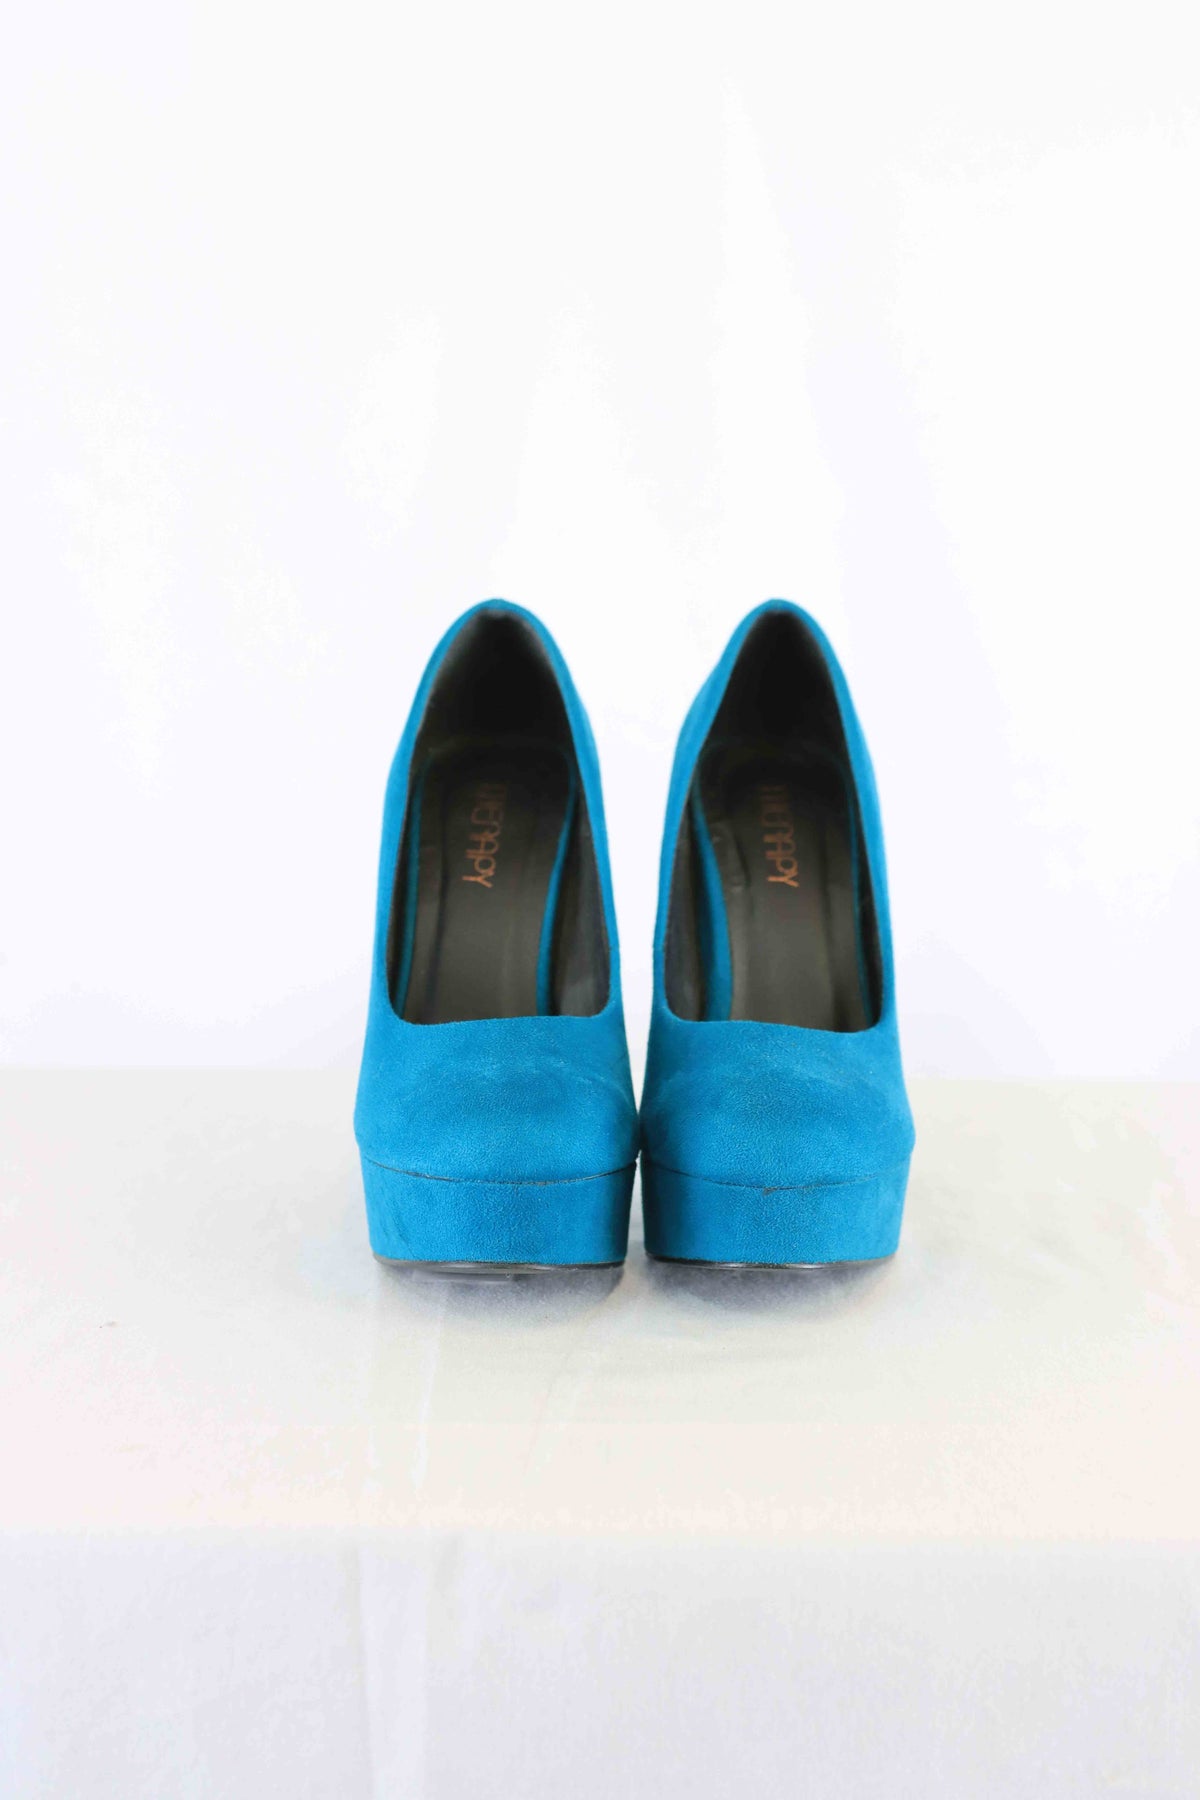 Therapy Blue Heels 6